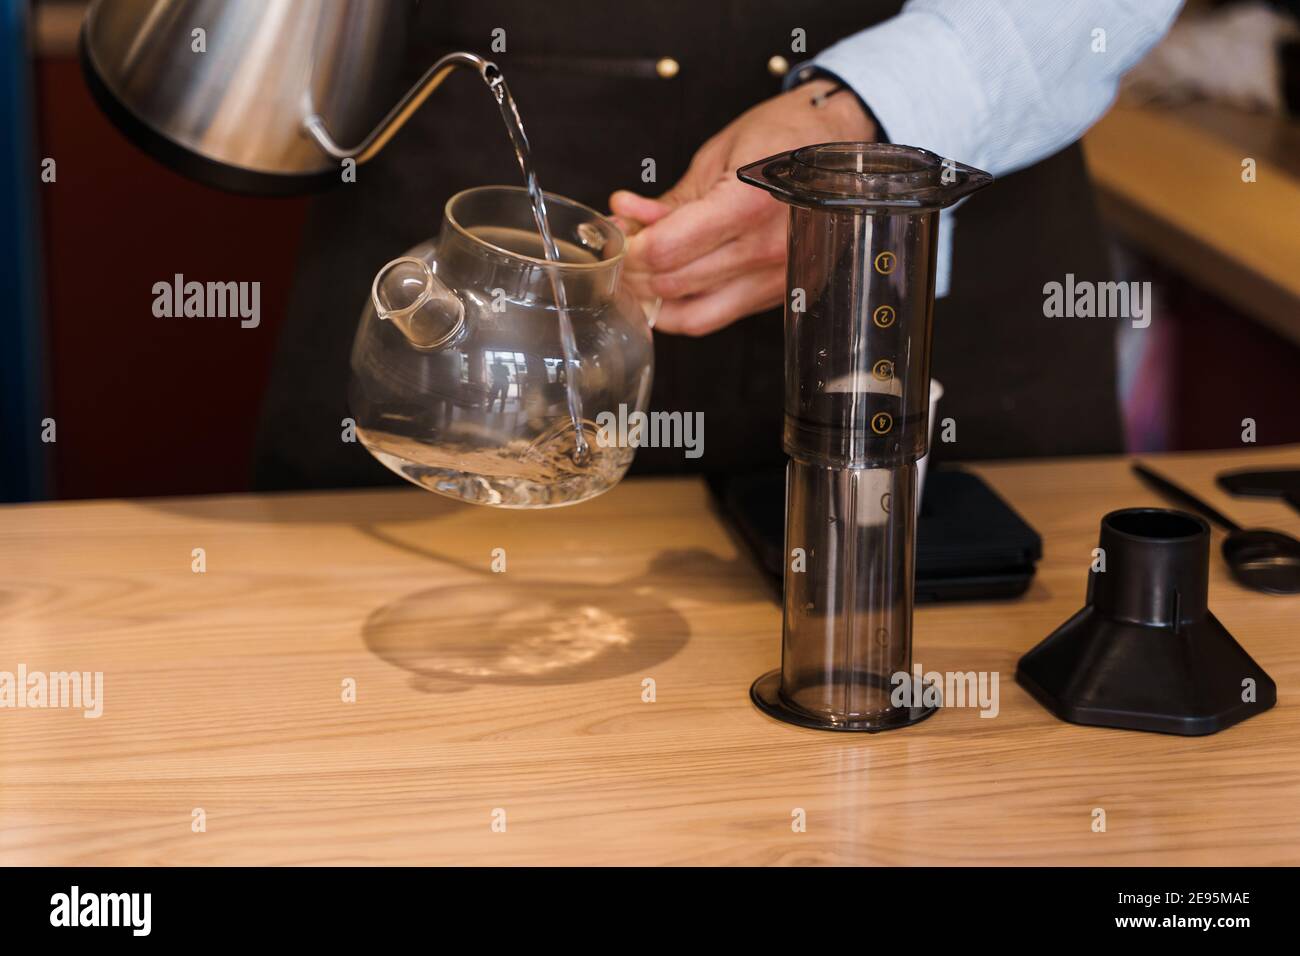 https://c8.alamy.com/comp/2E95MAE/aeropress-coffee-alternative-making-by-barista-in-the-cafe-barista-pours-hot-water-in-pot-for-making-aeropress-coffee-with-special-device-advert-for-2E95MAE.jpg